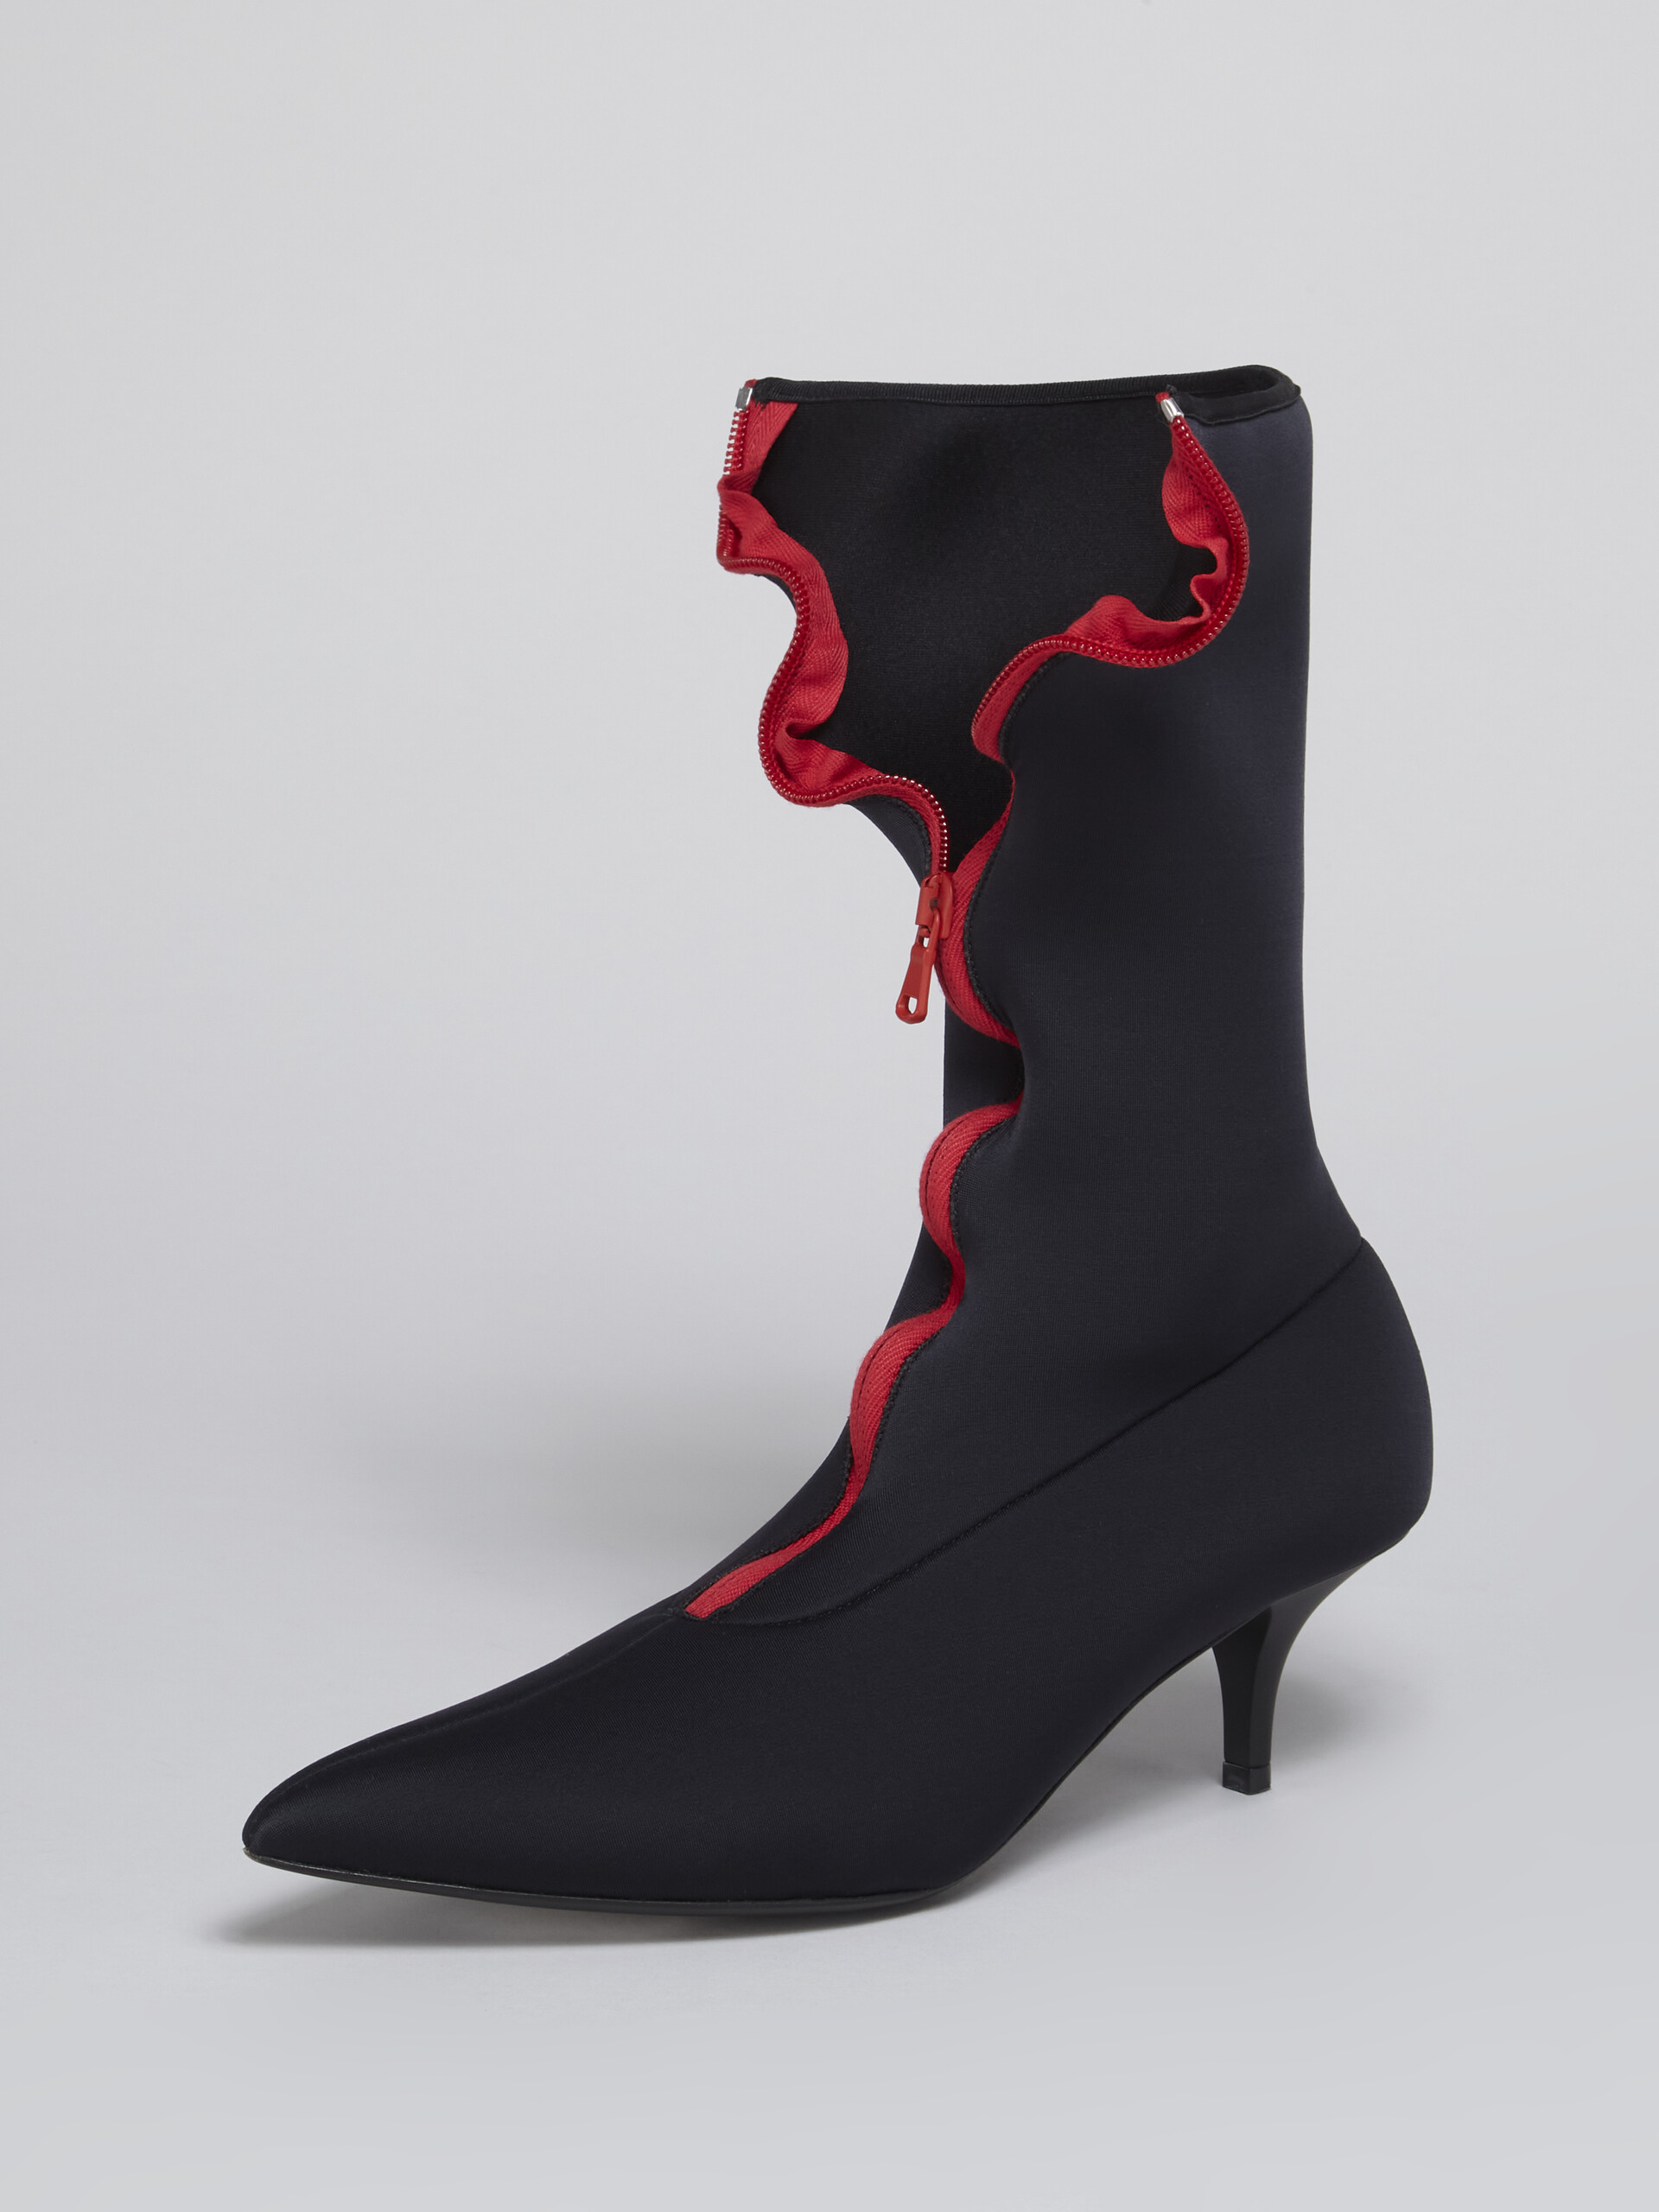 Pointed bootie in stretch neoprene - Boots - Image 4